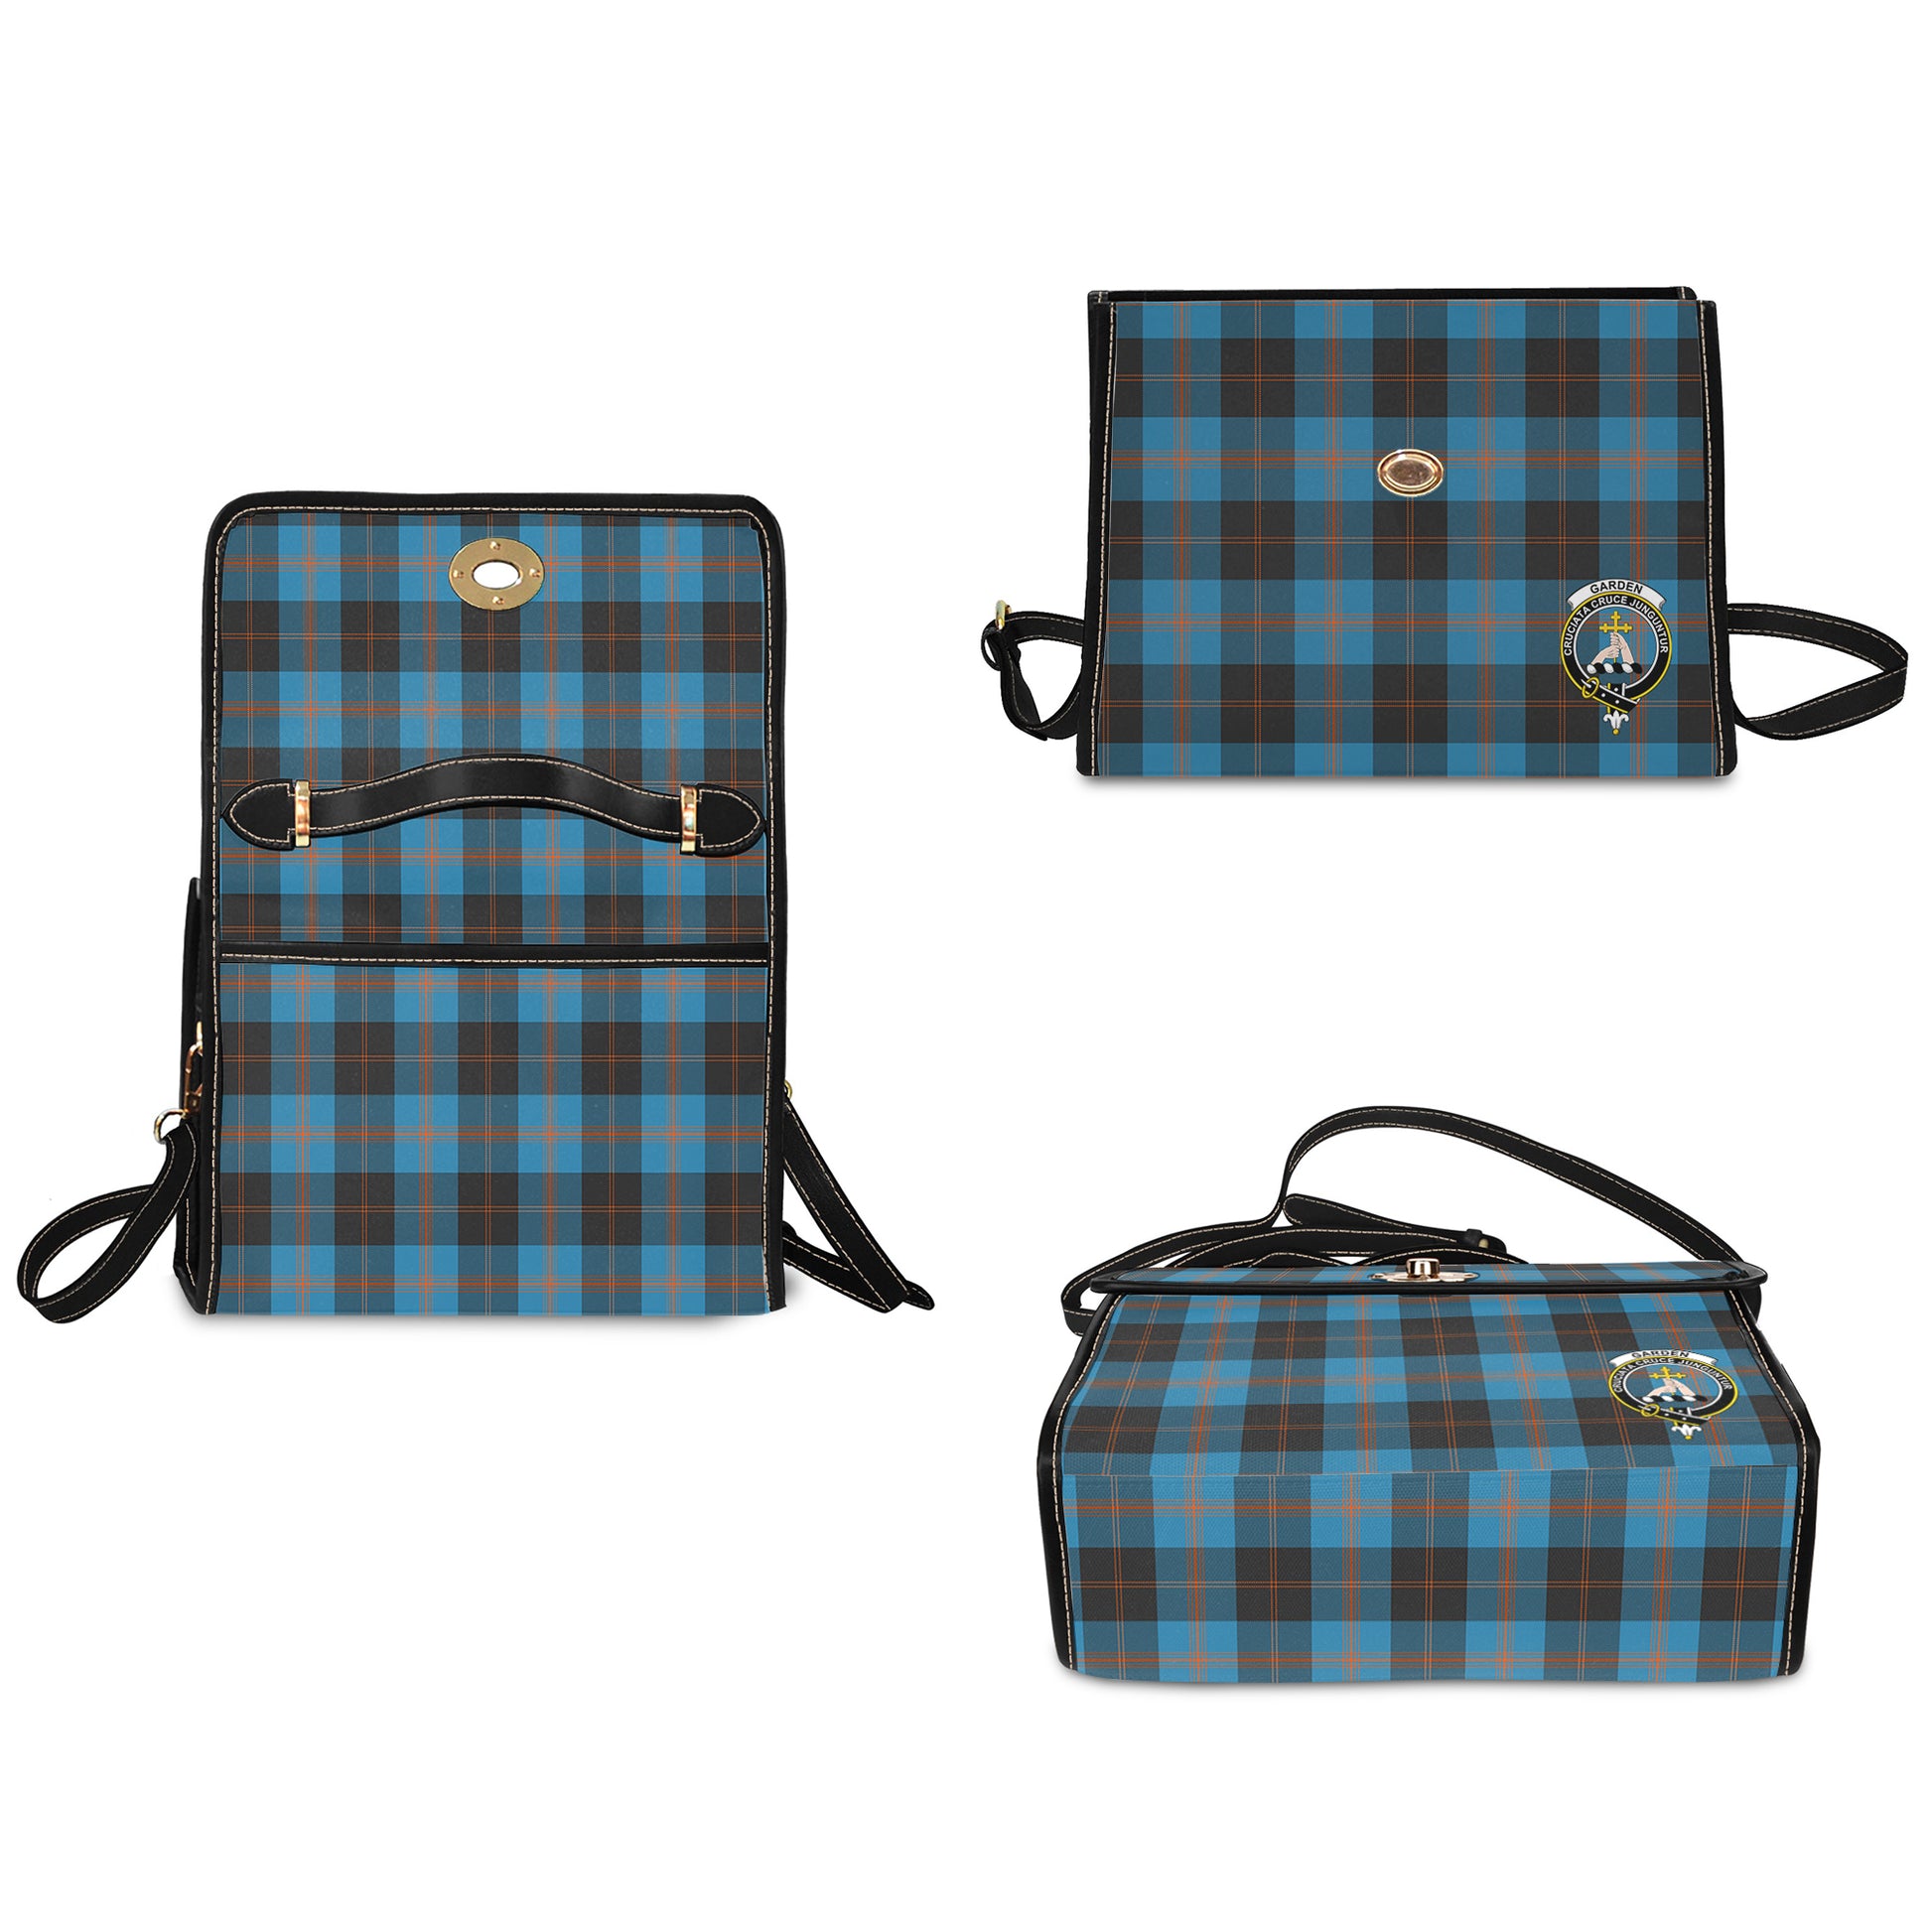 garden-tartan-leather-strap-waterproof-canvas-bag-with-family-crest